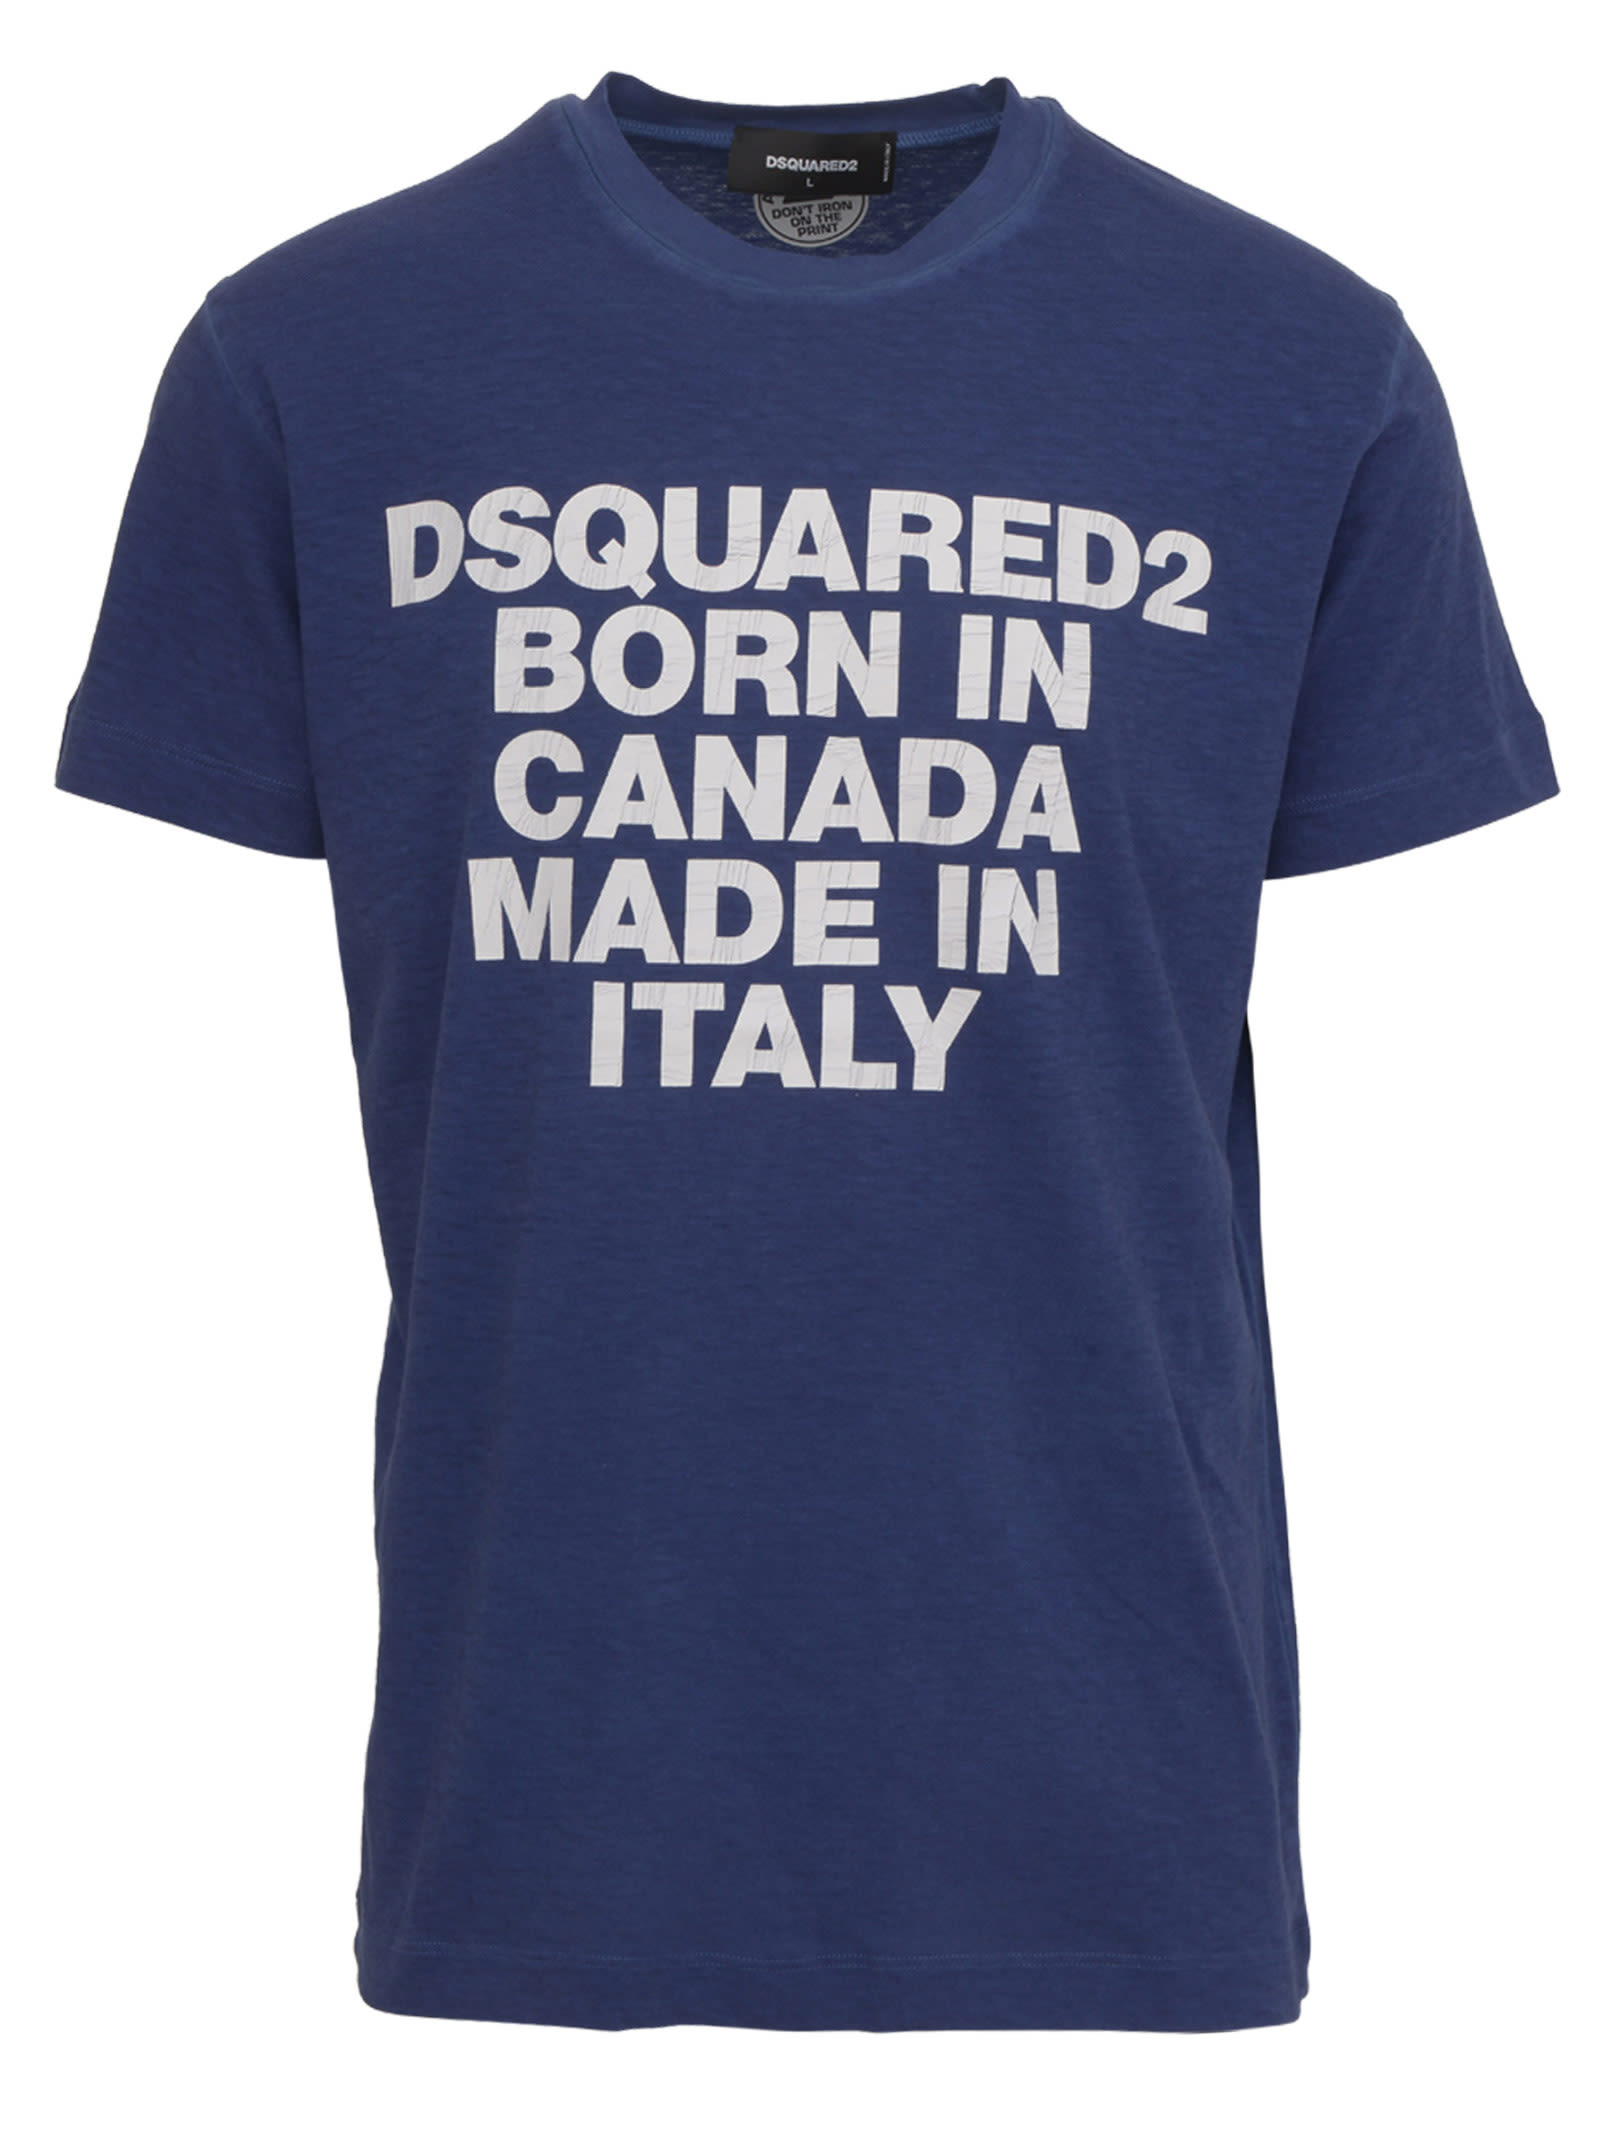 dsquared2 made in italy t shirt